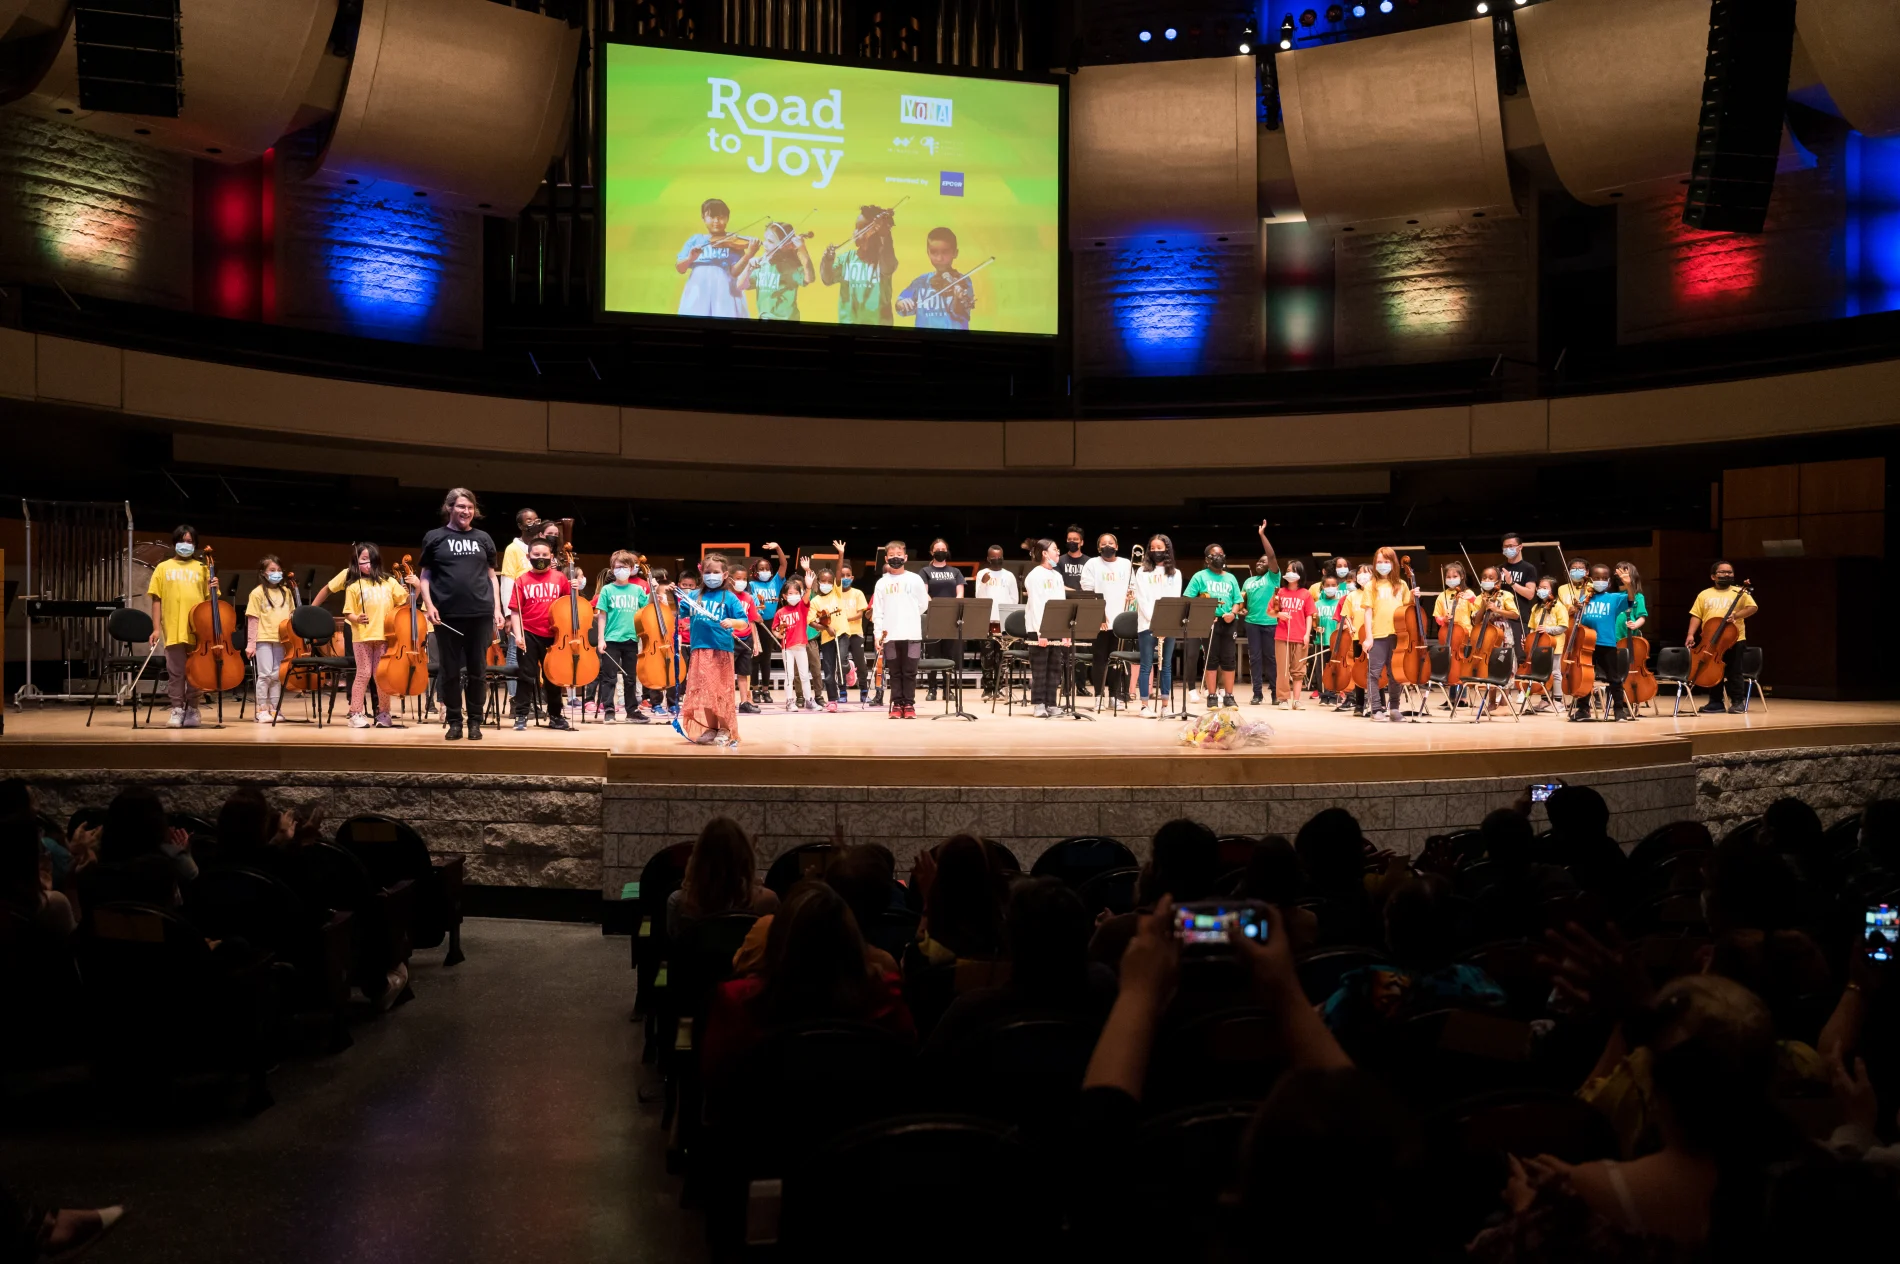 YONA students performing on-stage in front of an audience during the Road to Joy year-end concert.